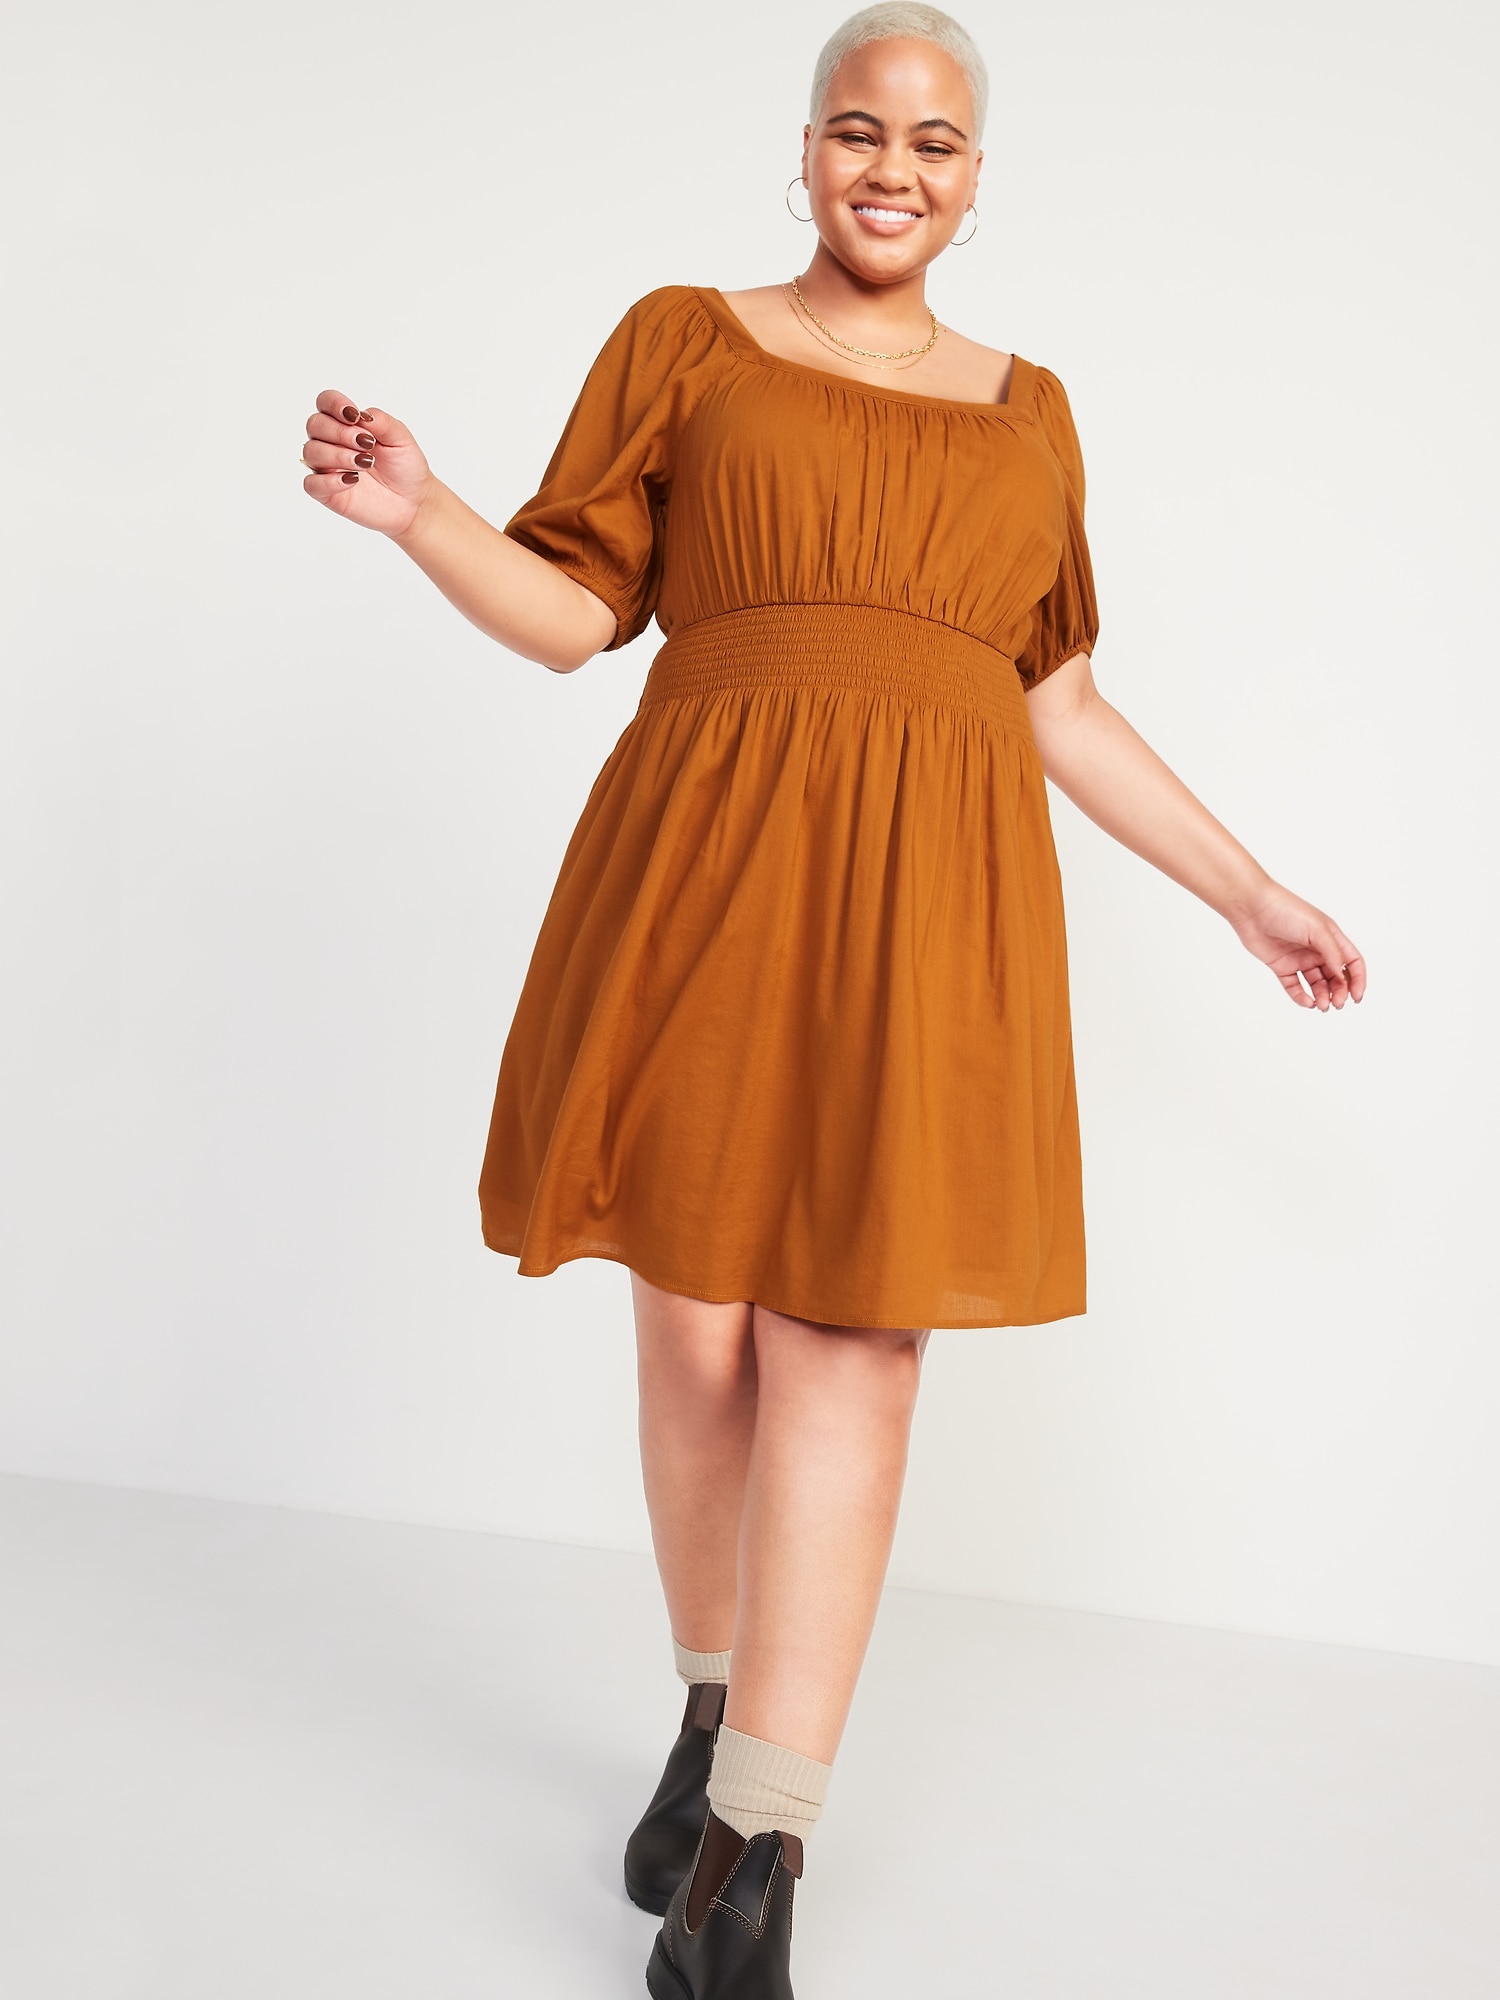 Women's Smocked Dresses | French Connection EU